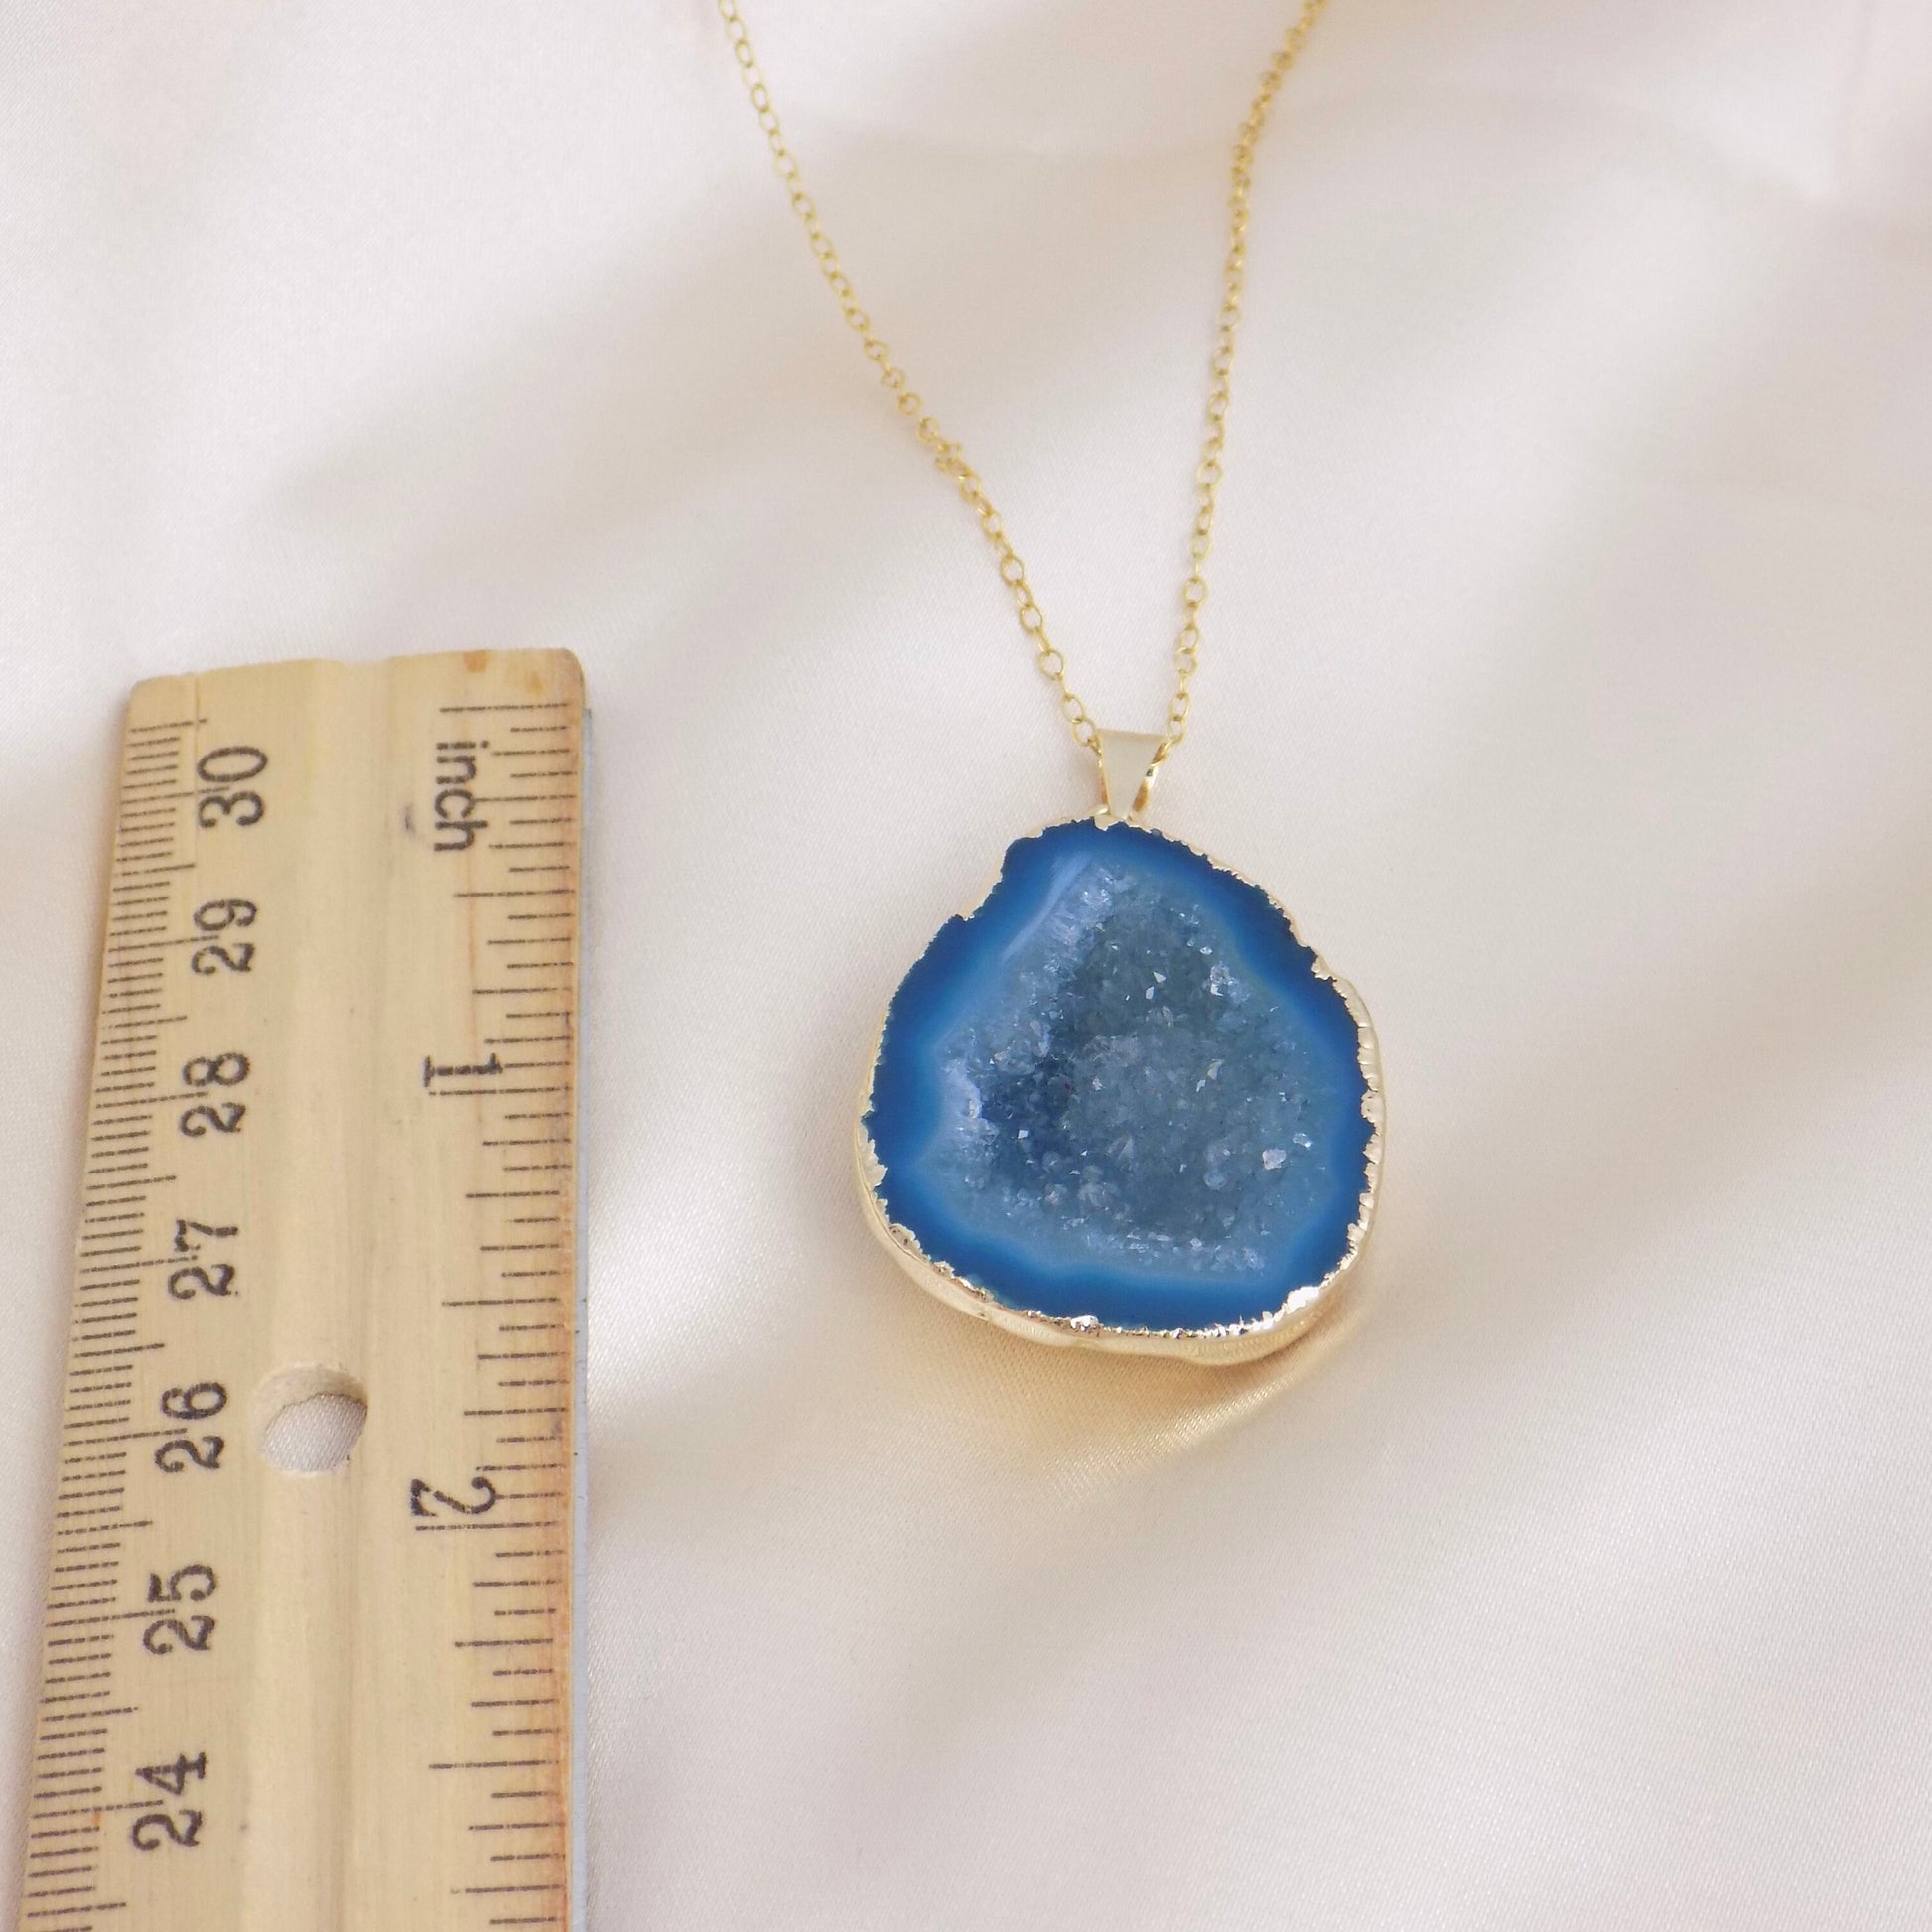 Turquoise Druzy Necklace, Small Geode Pendant, Crystal Pendant Gold Gemstone, Gift For Mom, G13-540